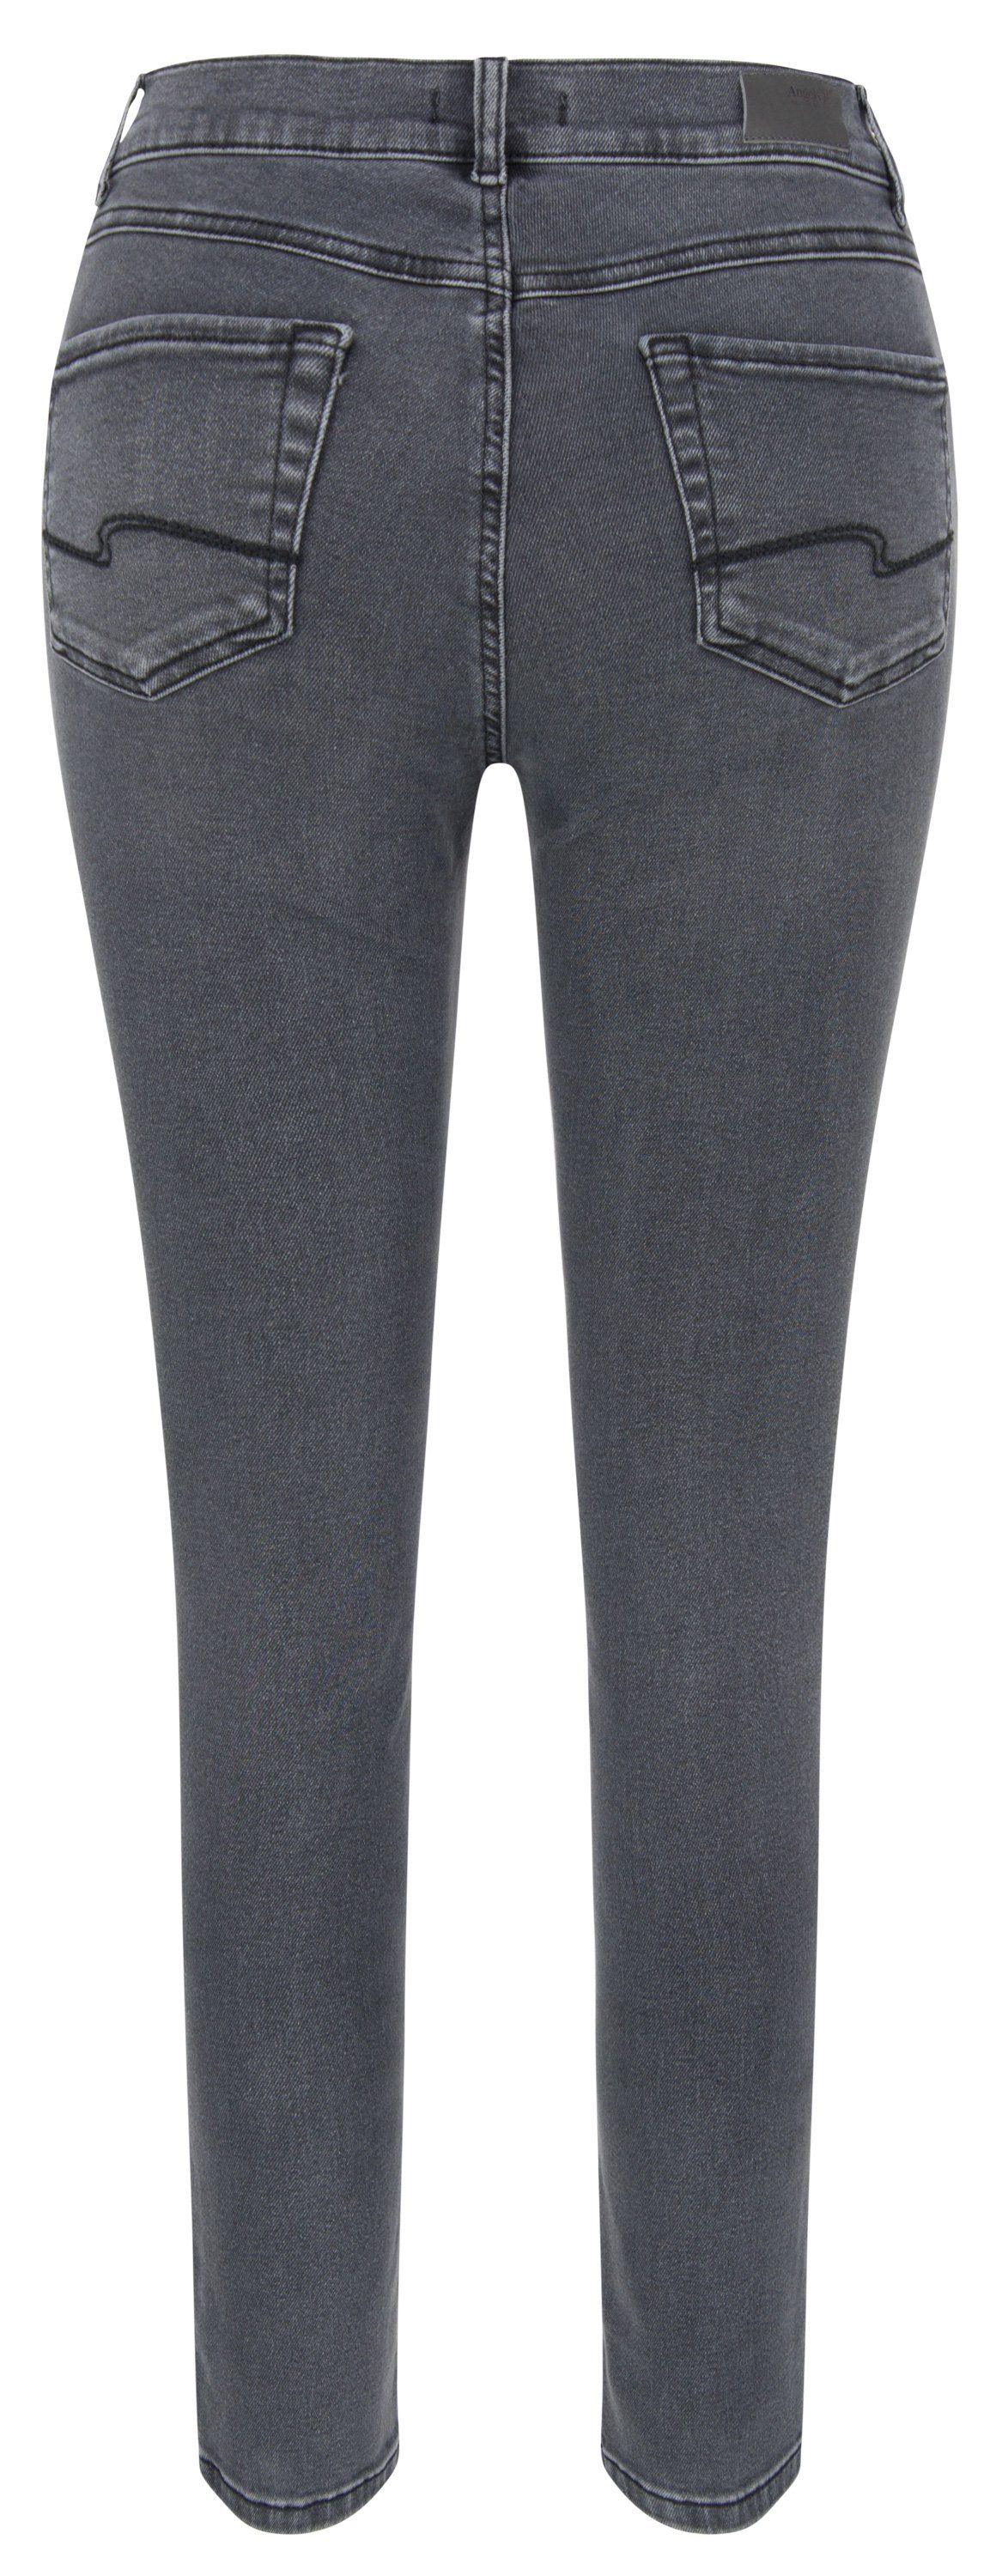 grey Stretch-Jeans STRETCH ANGELS ANGELS used 325 - SKINNY JEANS 12.1258